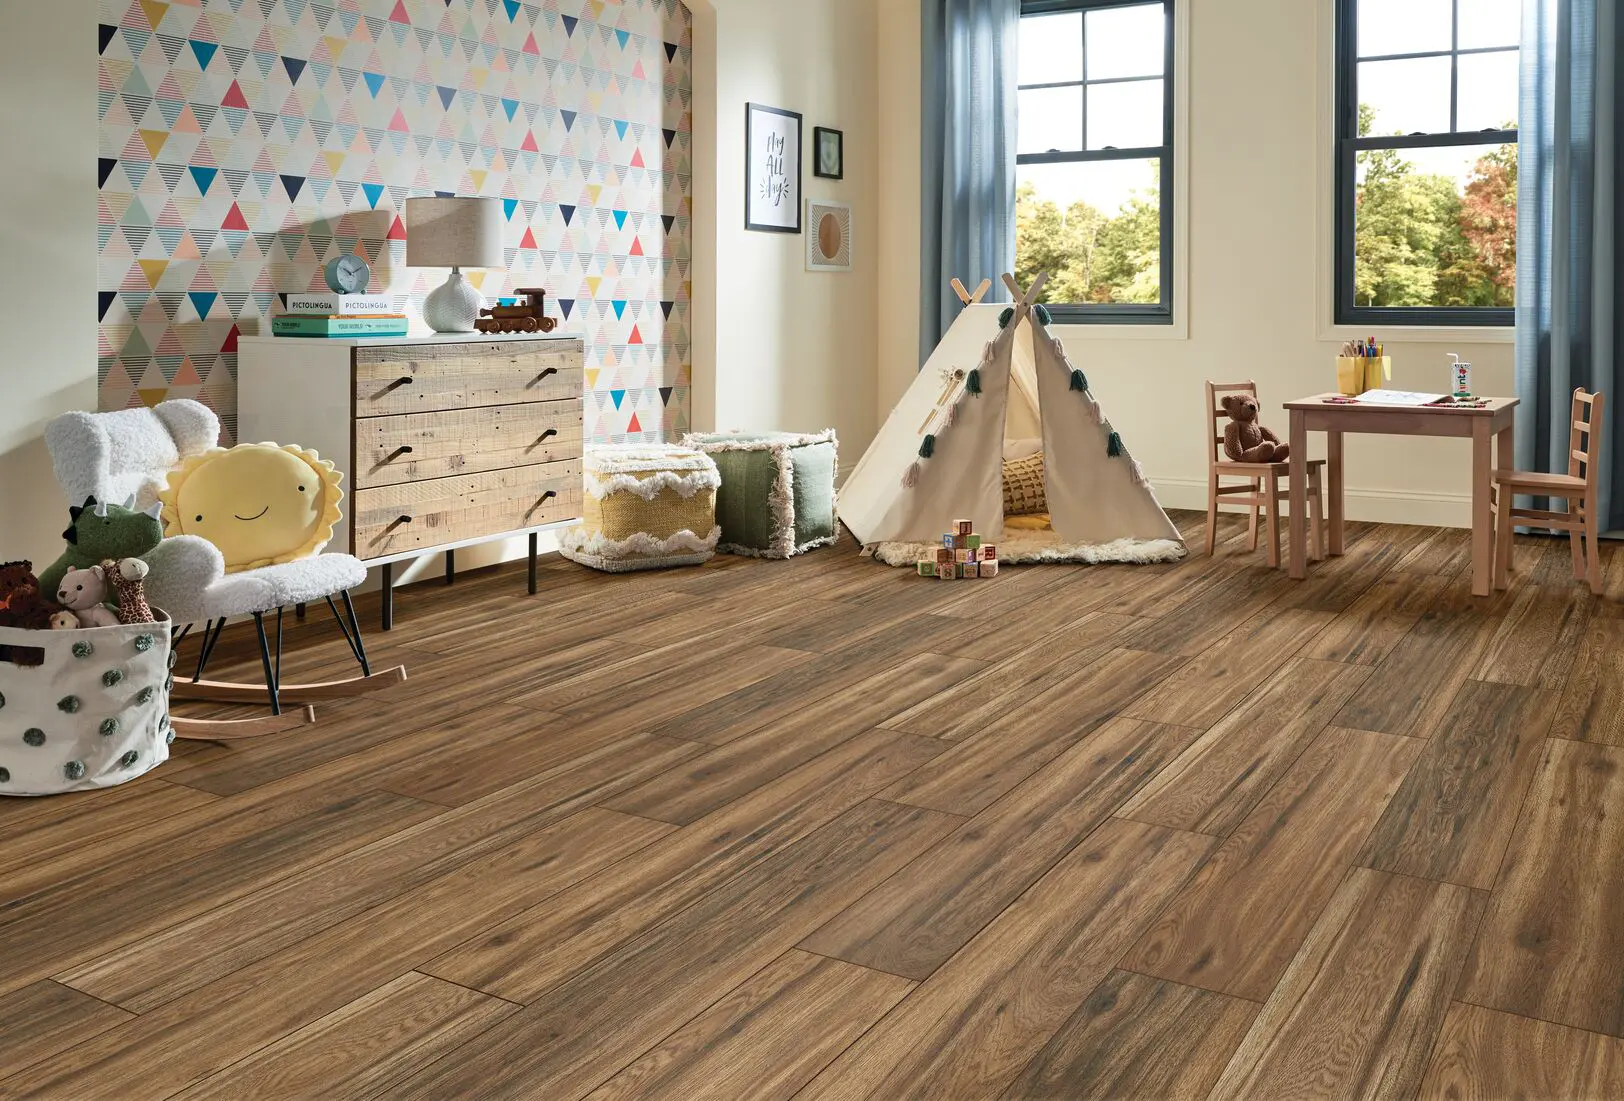 Picture of a Nice Living Space with Premium Flooring